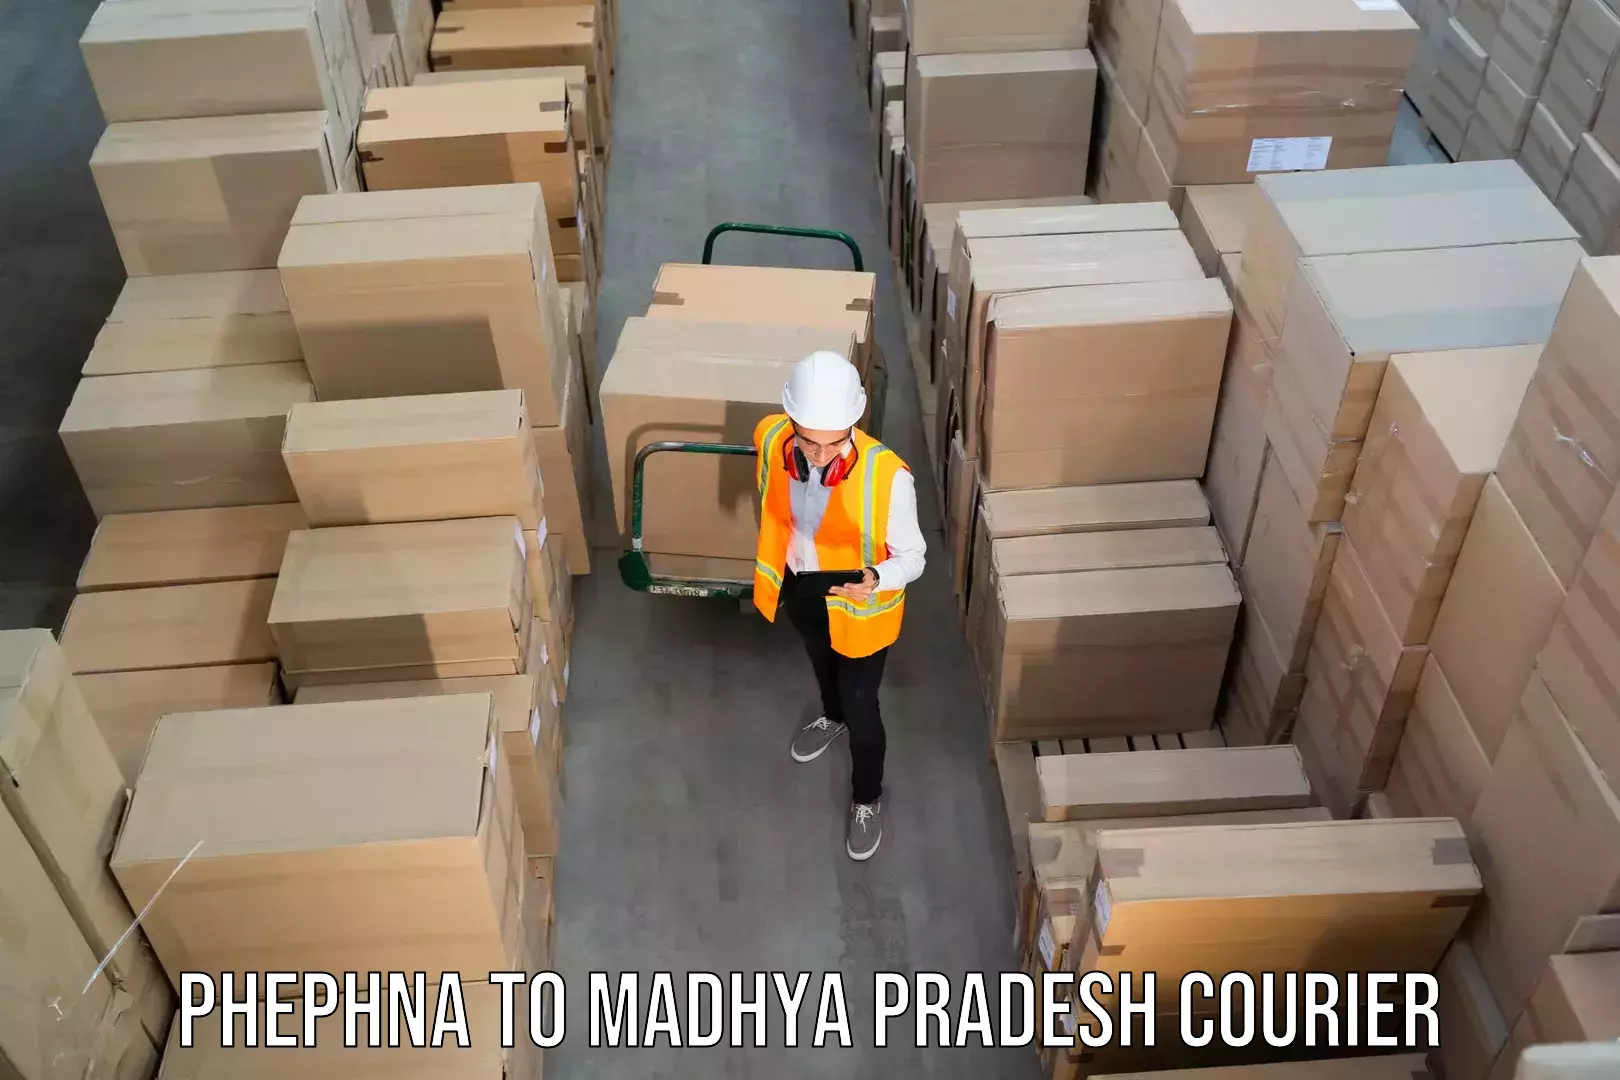 Nationwide shipping coverage Phephna to Deosar